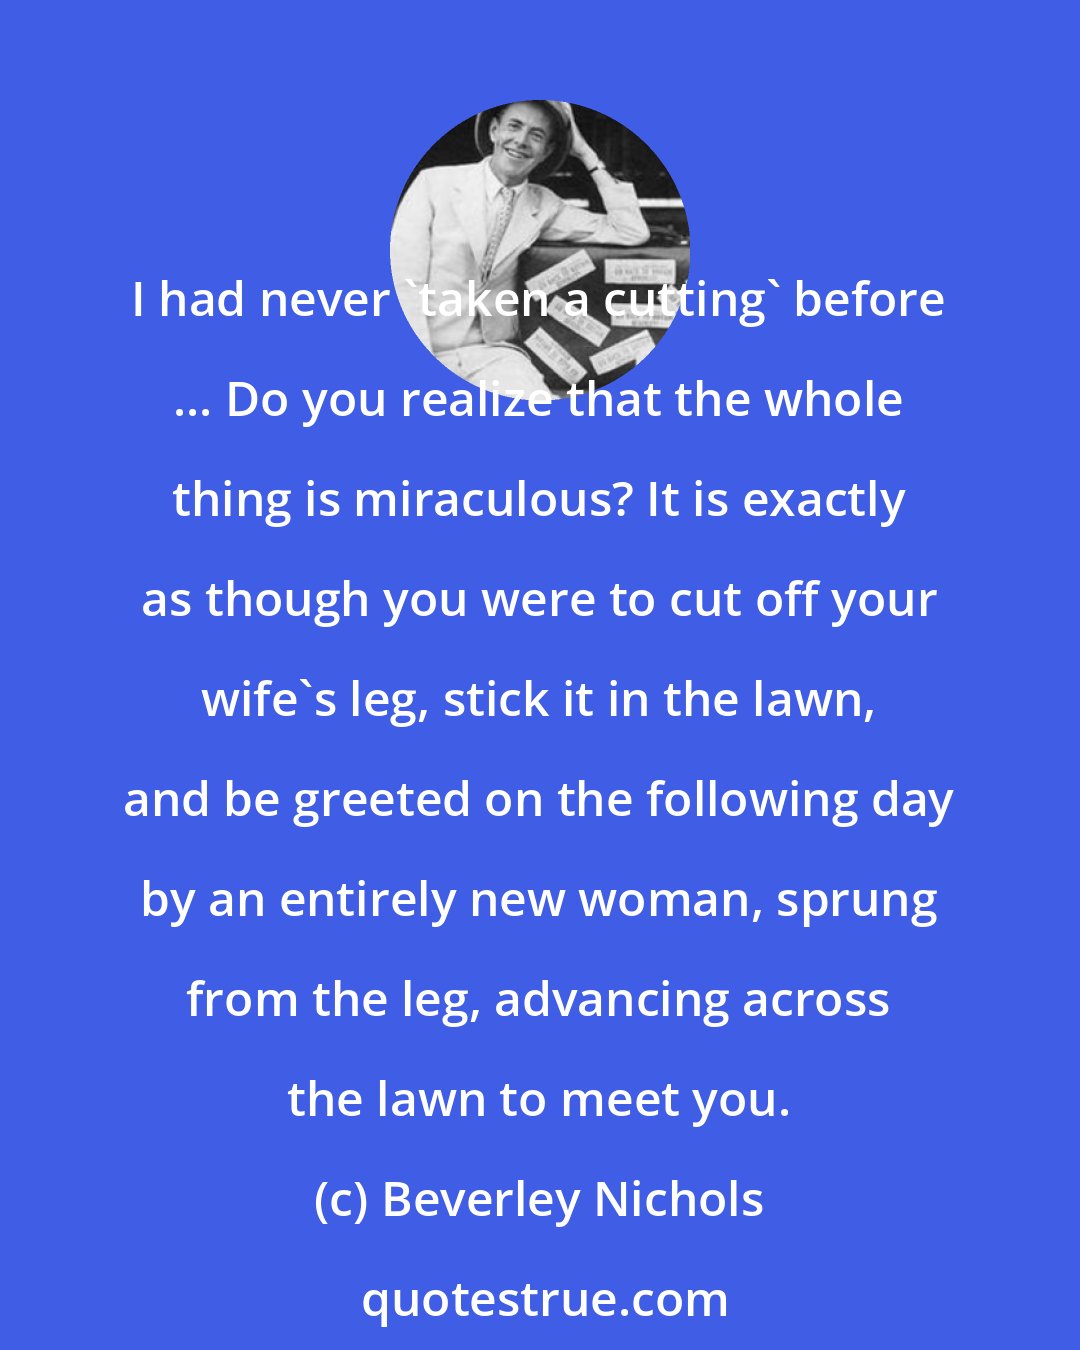 Beverley Nichols: I had never 'taken a cutting' before ... Do you realize that the whole thing is miraculous? It is exactly as though you were to cut off your wife's leg, stick it in the lawn, and be greeted on the following day by an entirely new woman, sprung from the leg, advancing across the lawn to meet you.